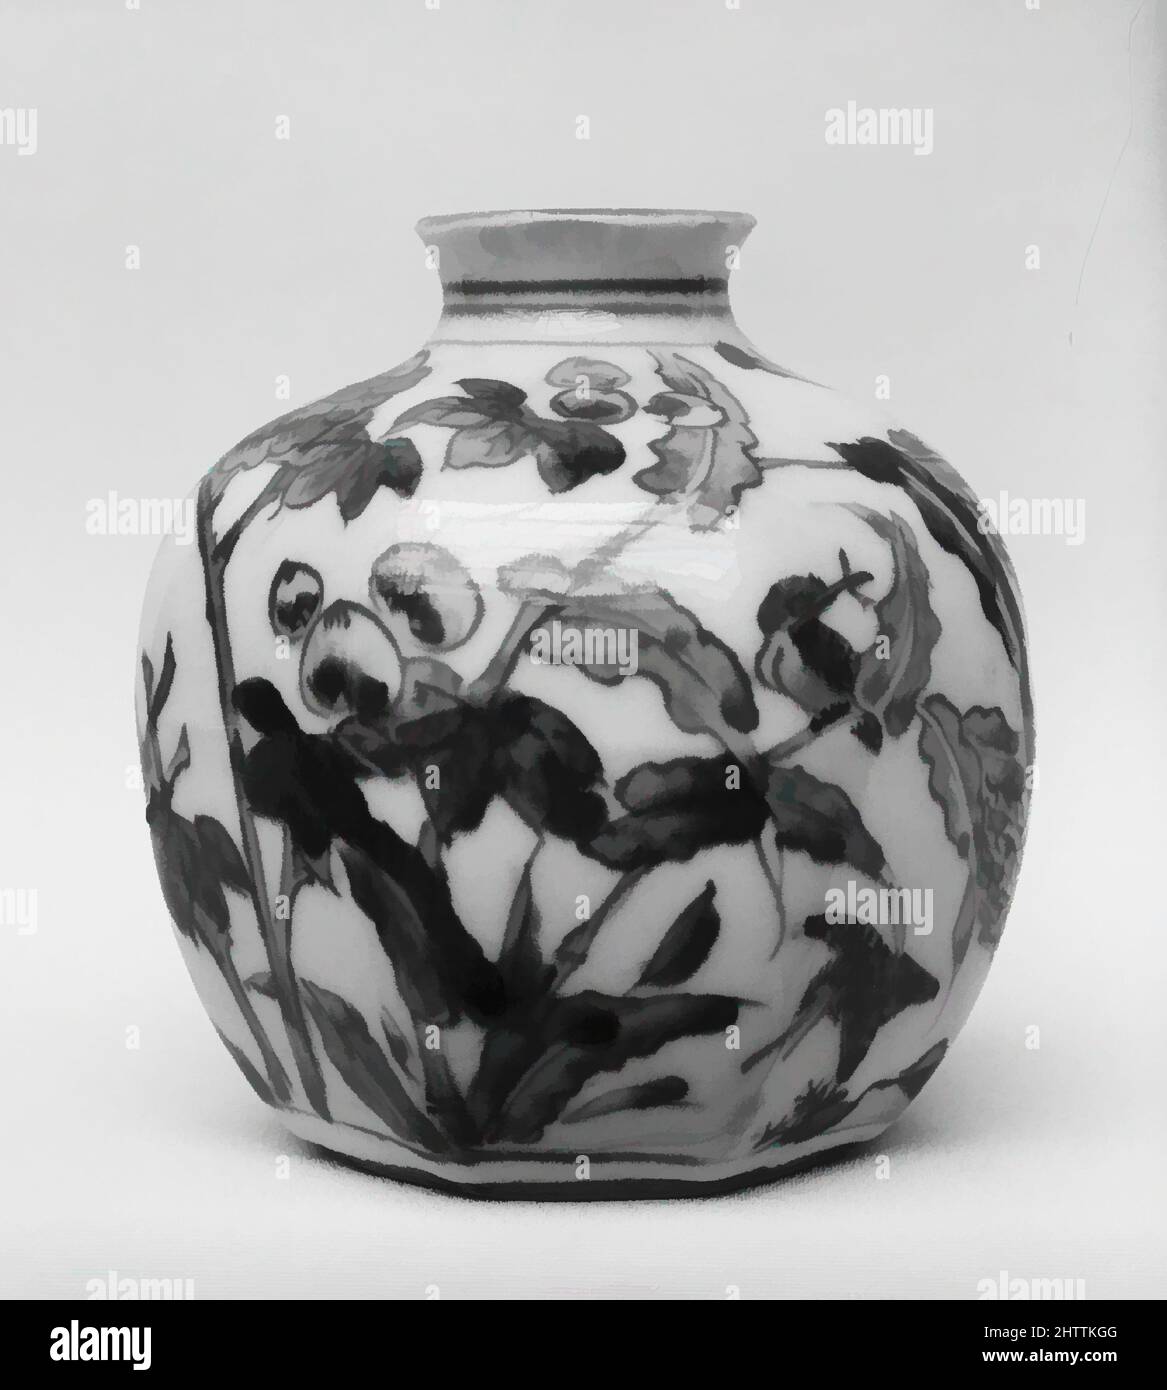 Art inspired by Jar, Edo period (1615–1868), 1620, Japan, Porcelain painted in underglaze blue (Arita ware, Imari type), H. 4 1/4 in. (10.8 cm), Ceramics, Classic works modernized by Artotop with a splash of modernity. Shapes, color and value, eye-catching visual impact on art. Emotions through freedom of artworks in a contemporary way. A timeless message pursuing a wildly creative new direction. Artists turning to the digital medium and creating the Artotop NFT Stock Photo